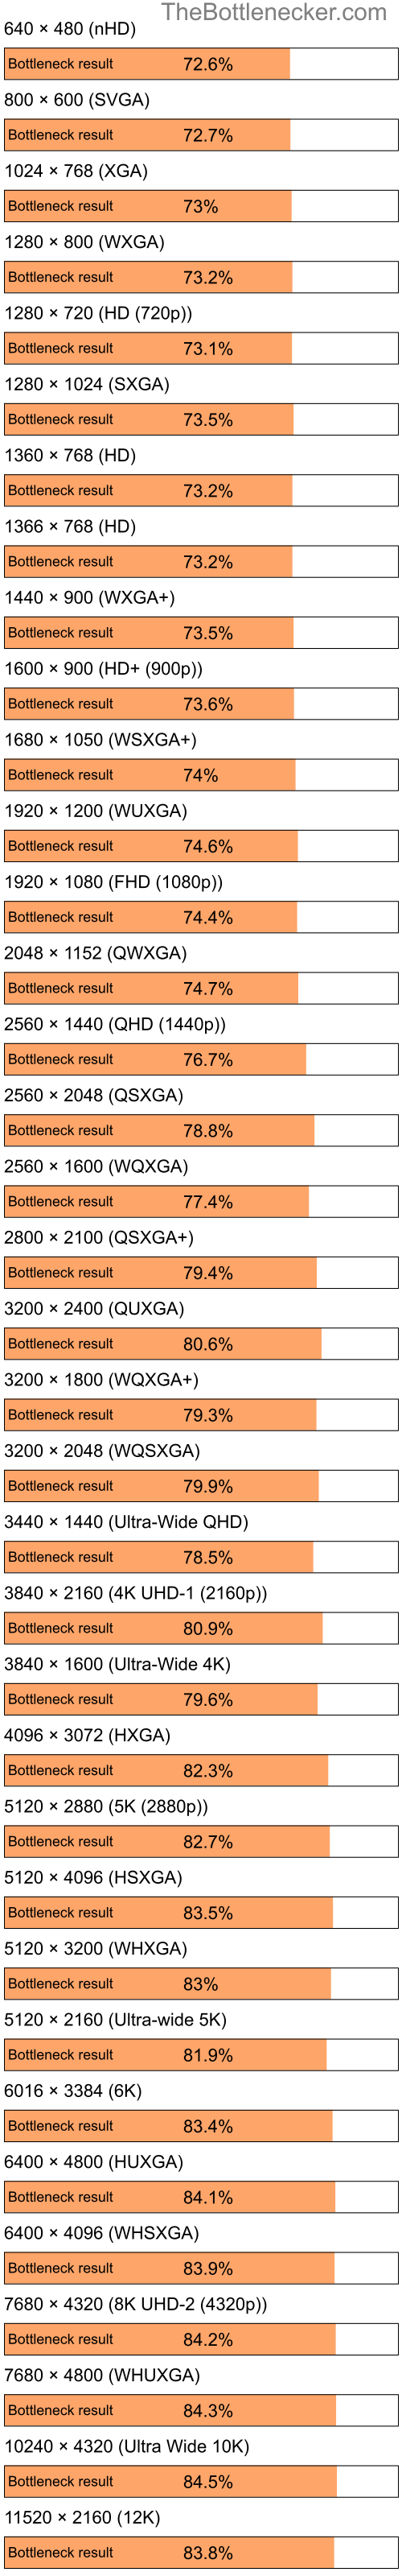 Bottleneck results by resolution for Intel Pentium 4 and NVIDIA GeForce 8400 in Graphic Card Intense Tasks